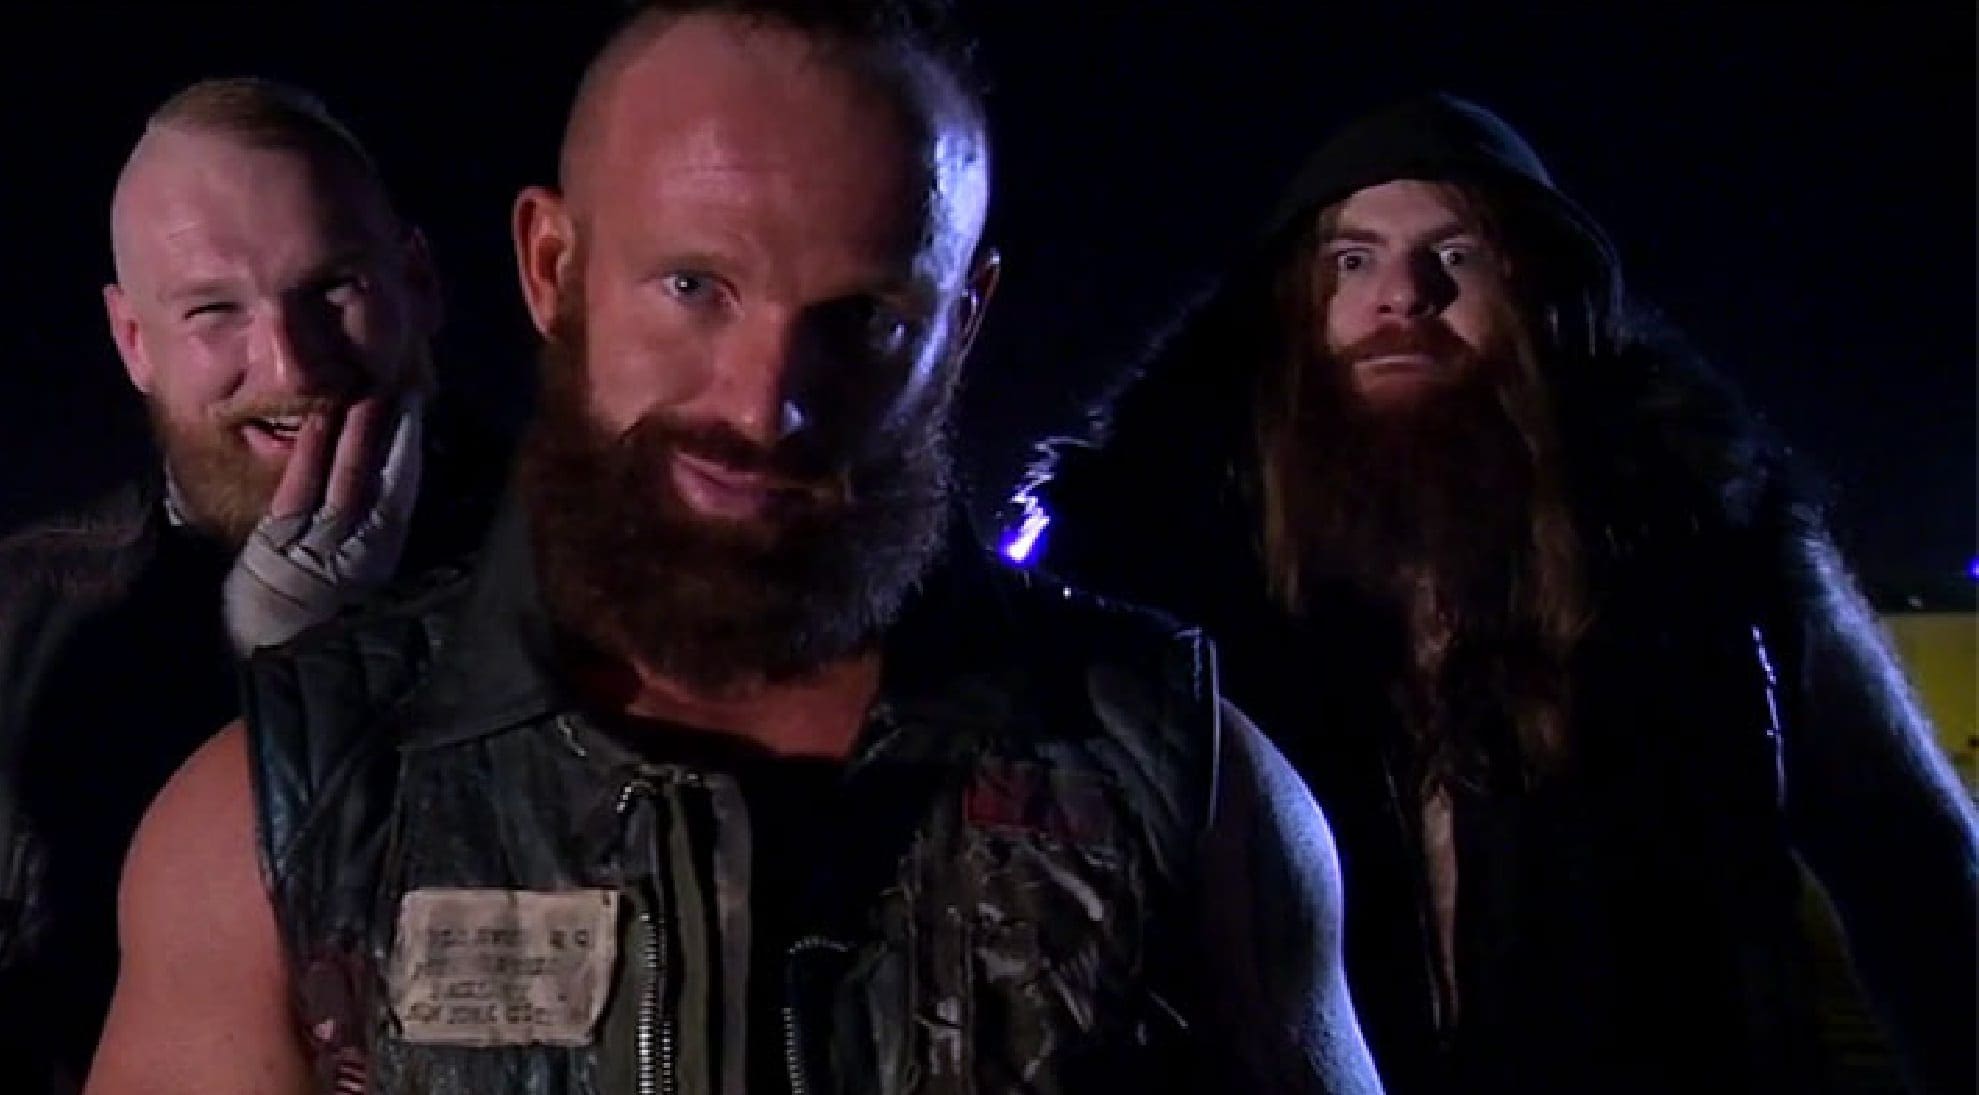 Watch SAnitY Work Their First WWE Main Roster House Show